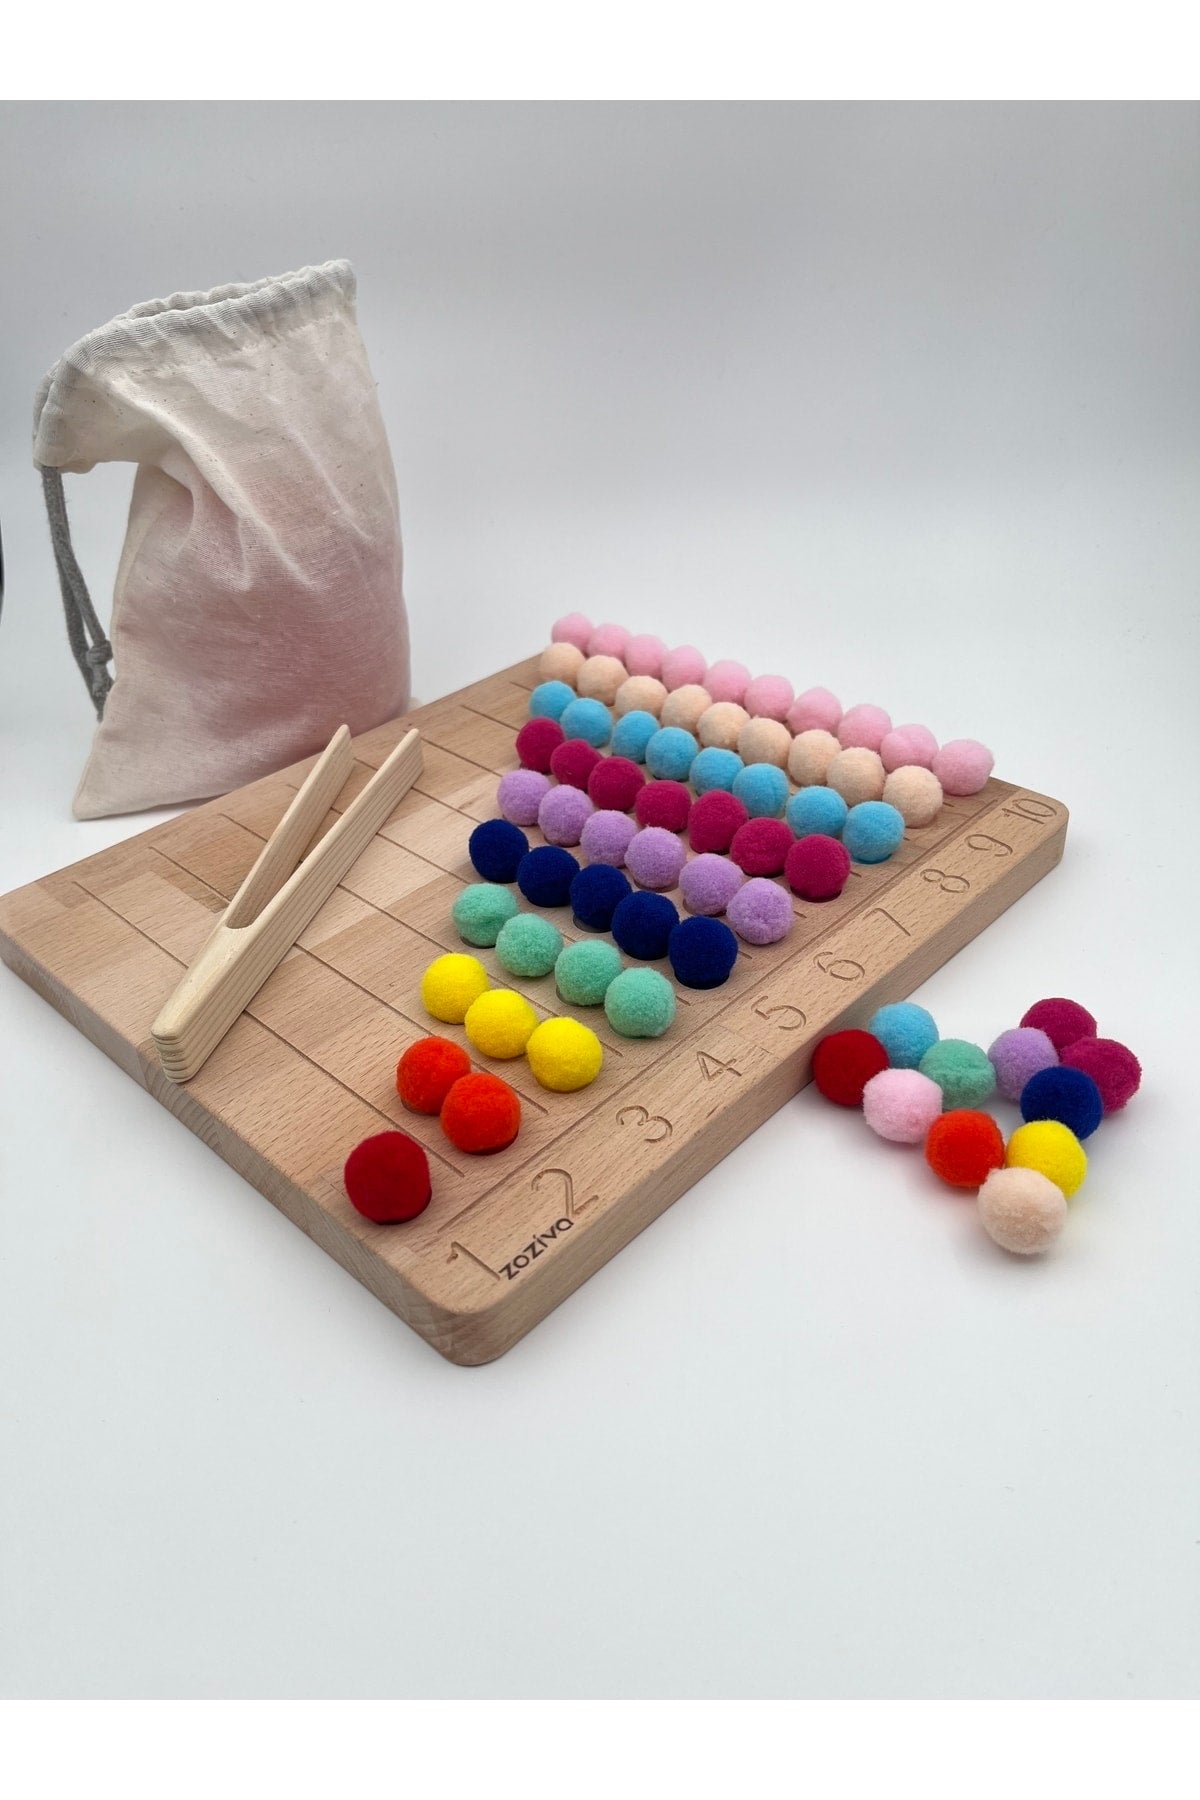 Montessori Educational Wooden Toy – Colorful Felt Balls Numbers Learning Board